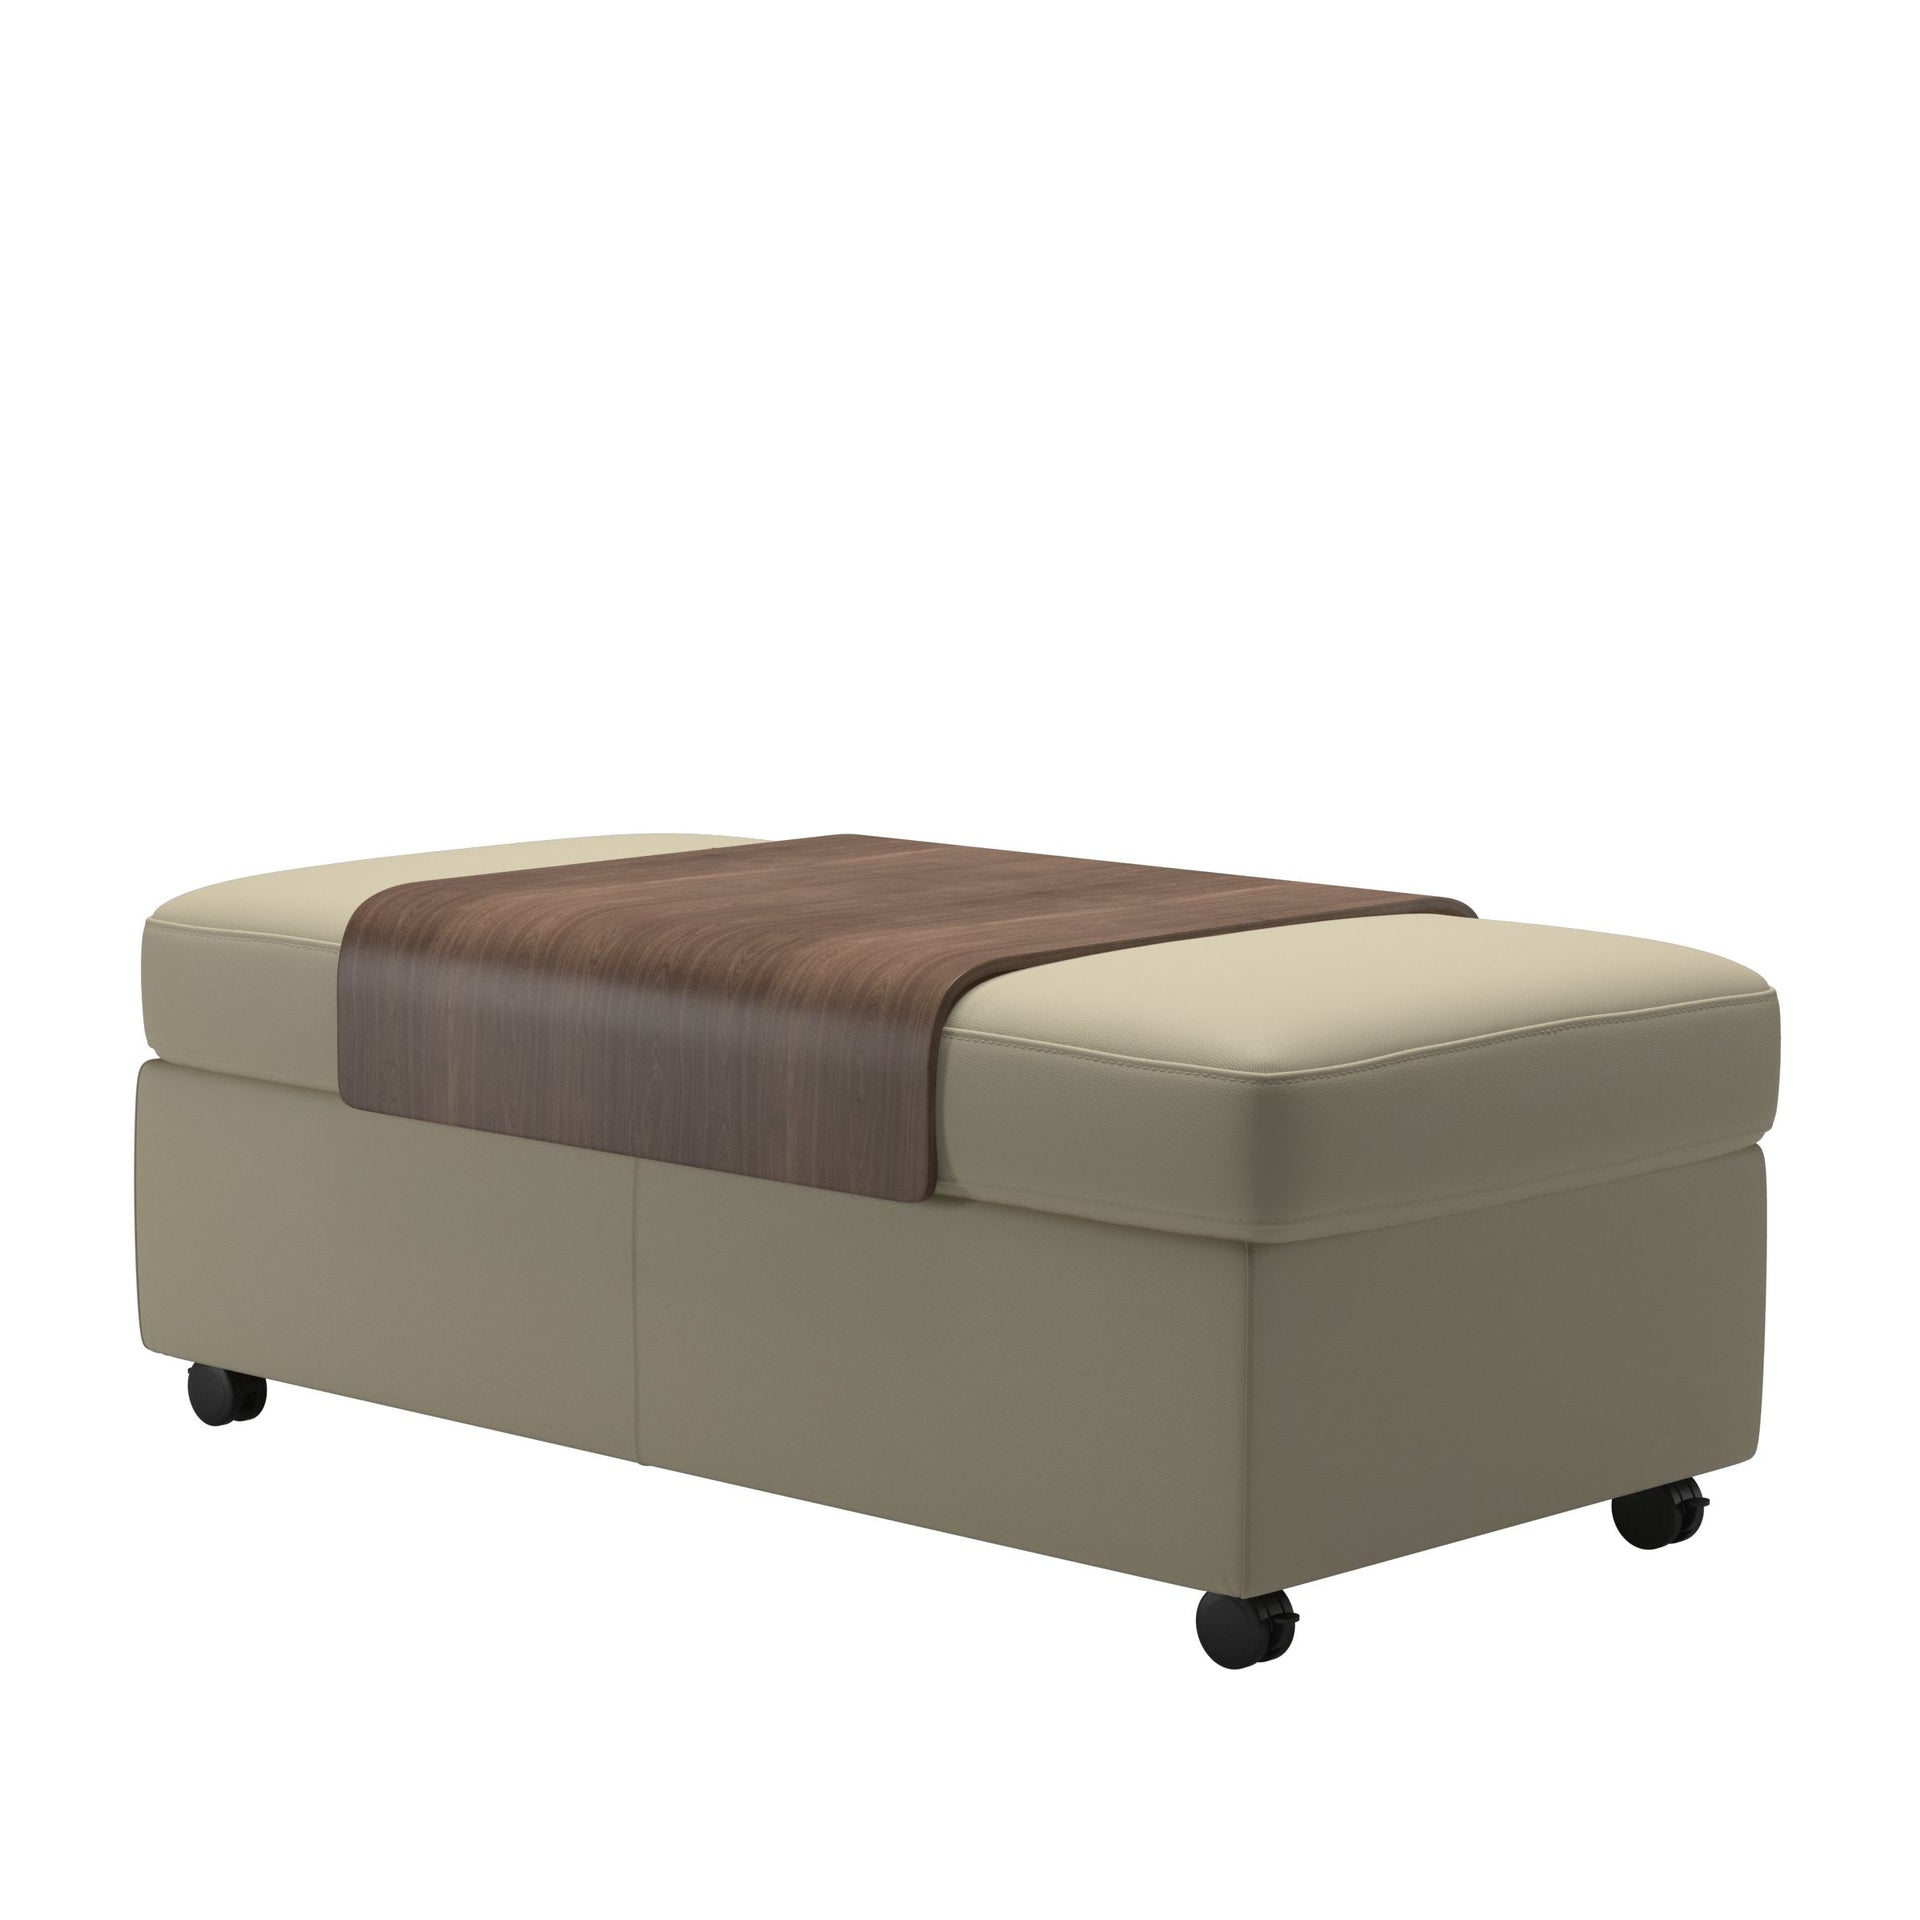 Stressless Double Ottoman Coffee Table